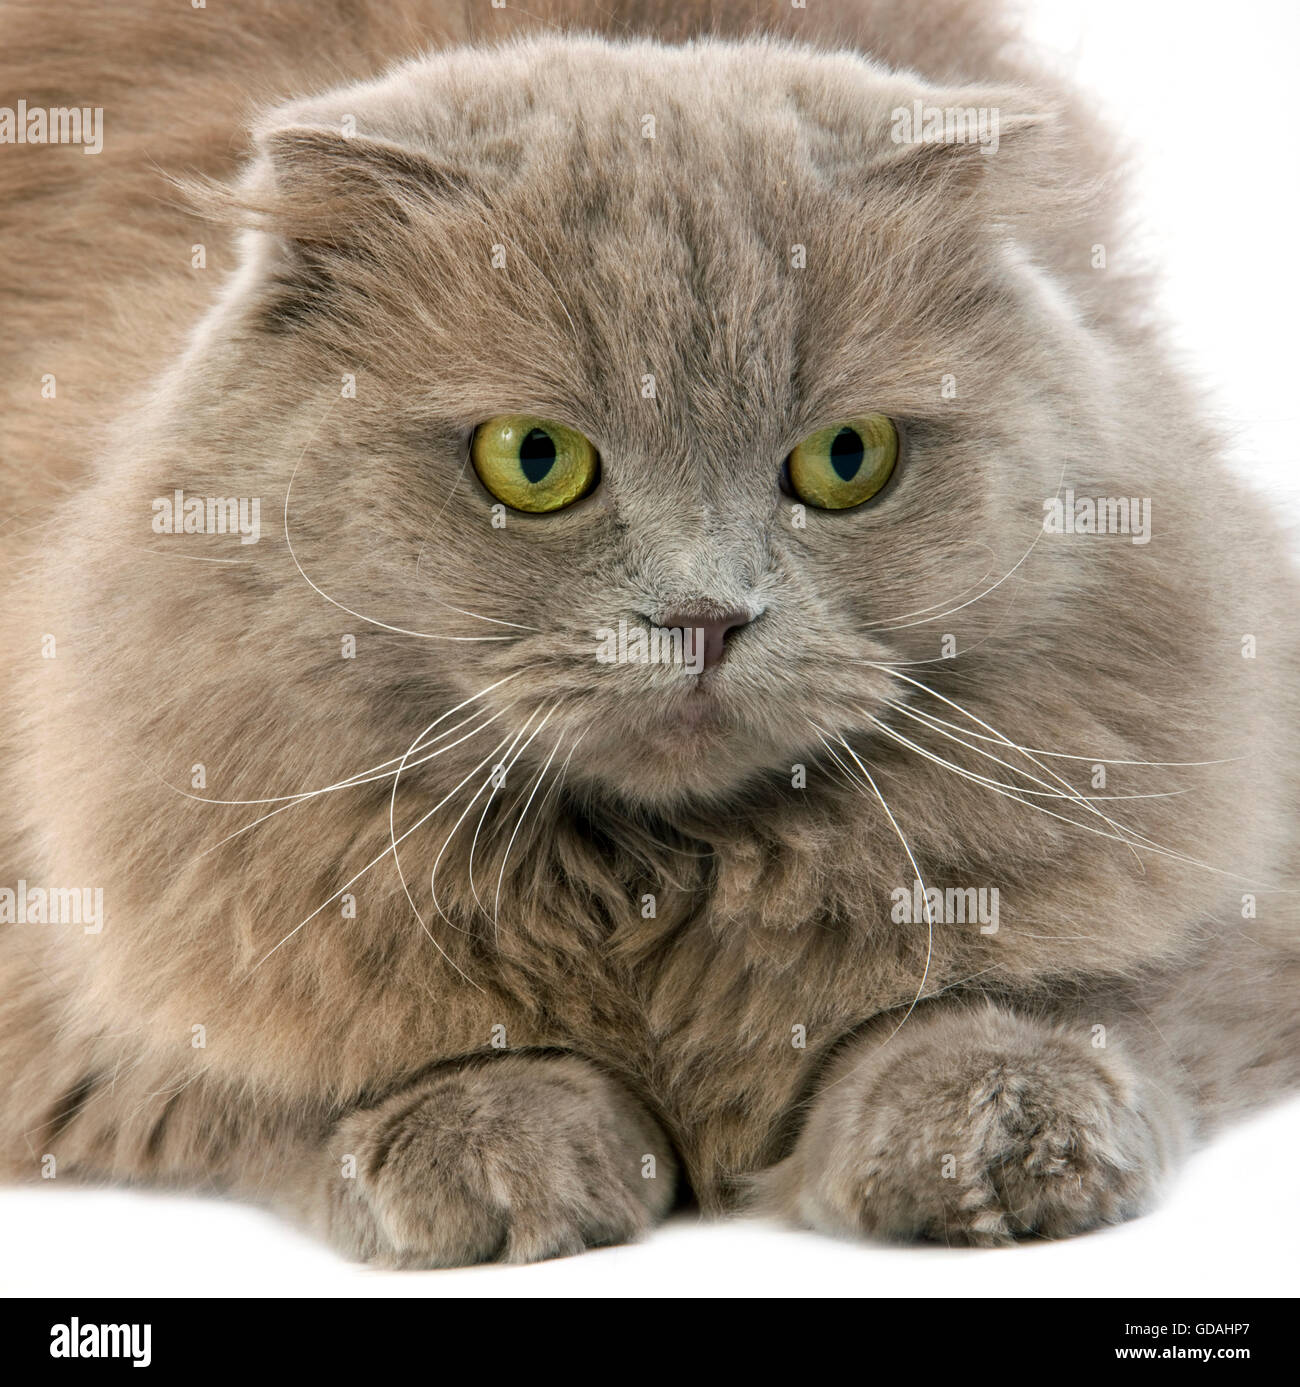 Lilac Self Highland Fold or Lilac Self Scottish Fold Longhair Domestic Cat, Female laying against White Background Stock Photo